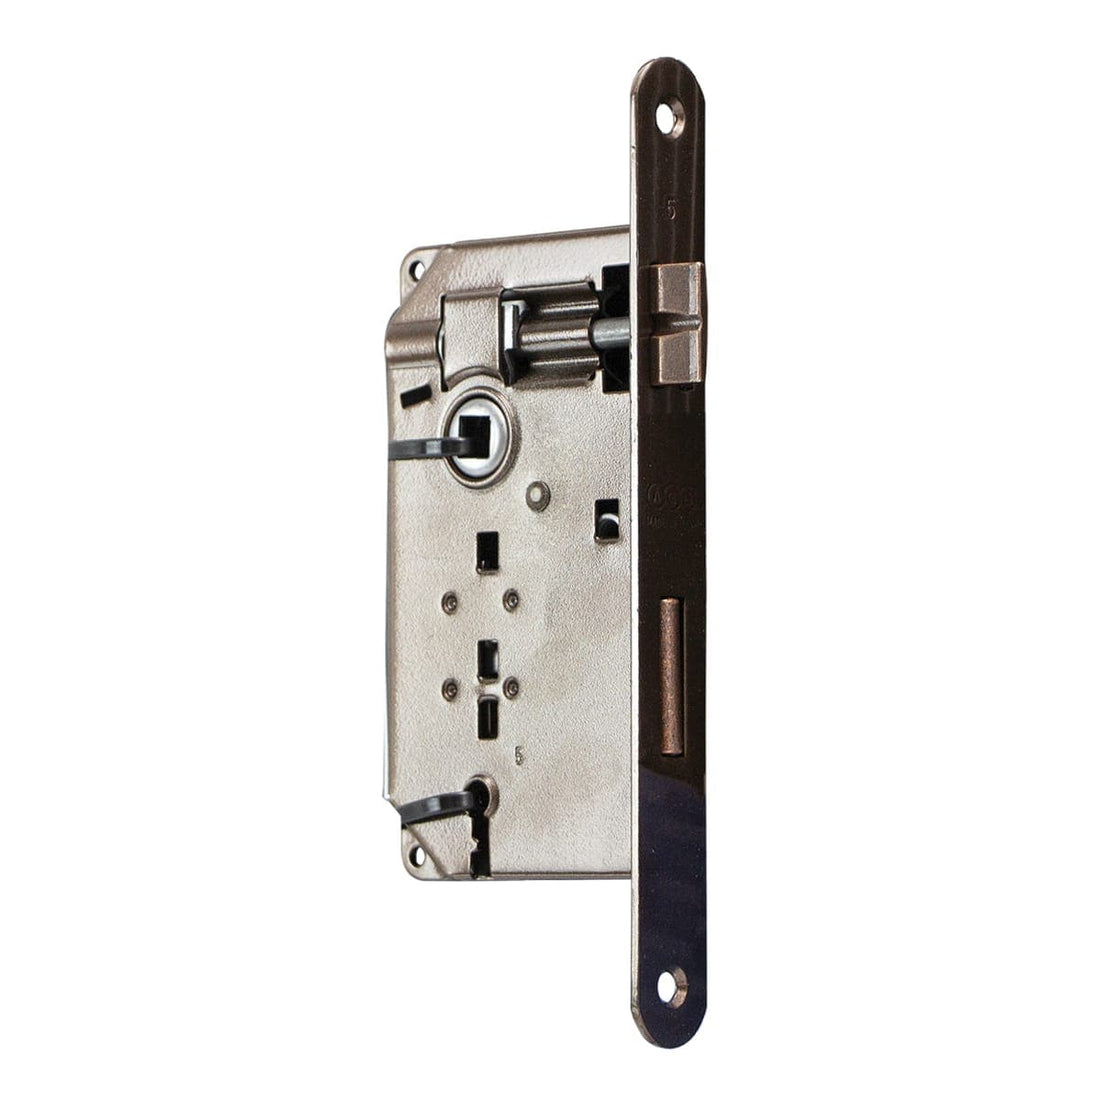 PATENT LOCK F22 CENTRE DISTANCE 90 MM ENTRY 40 MM ROUND EDGE PAINTED BRASS-PLATED STEEL